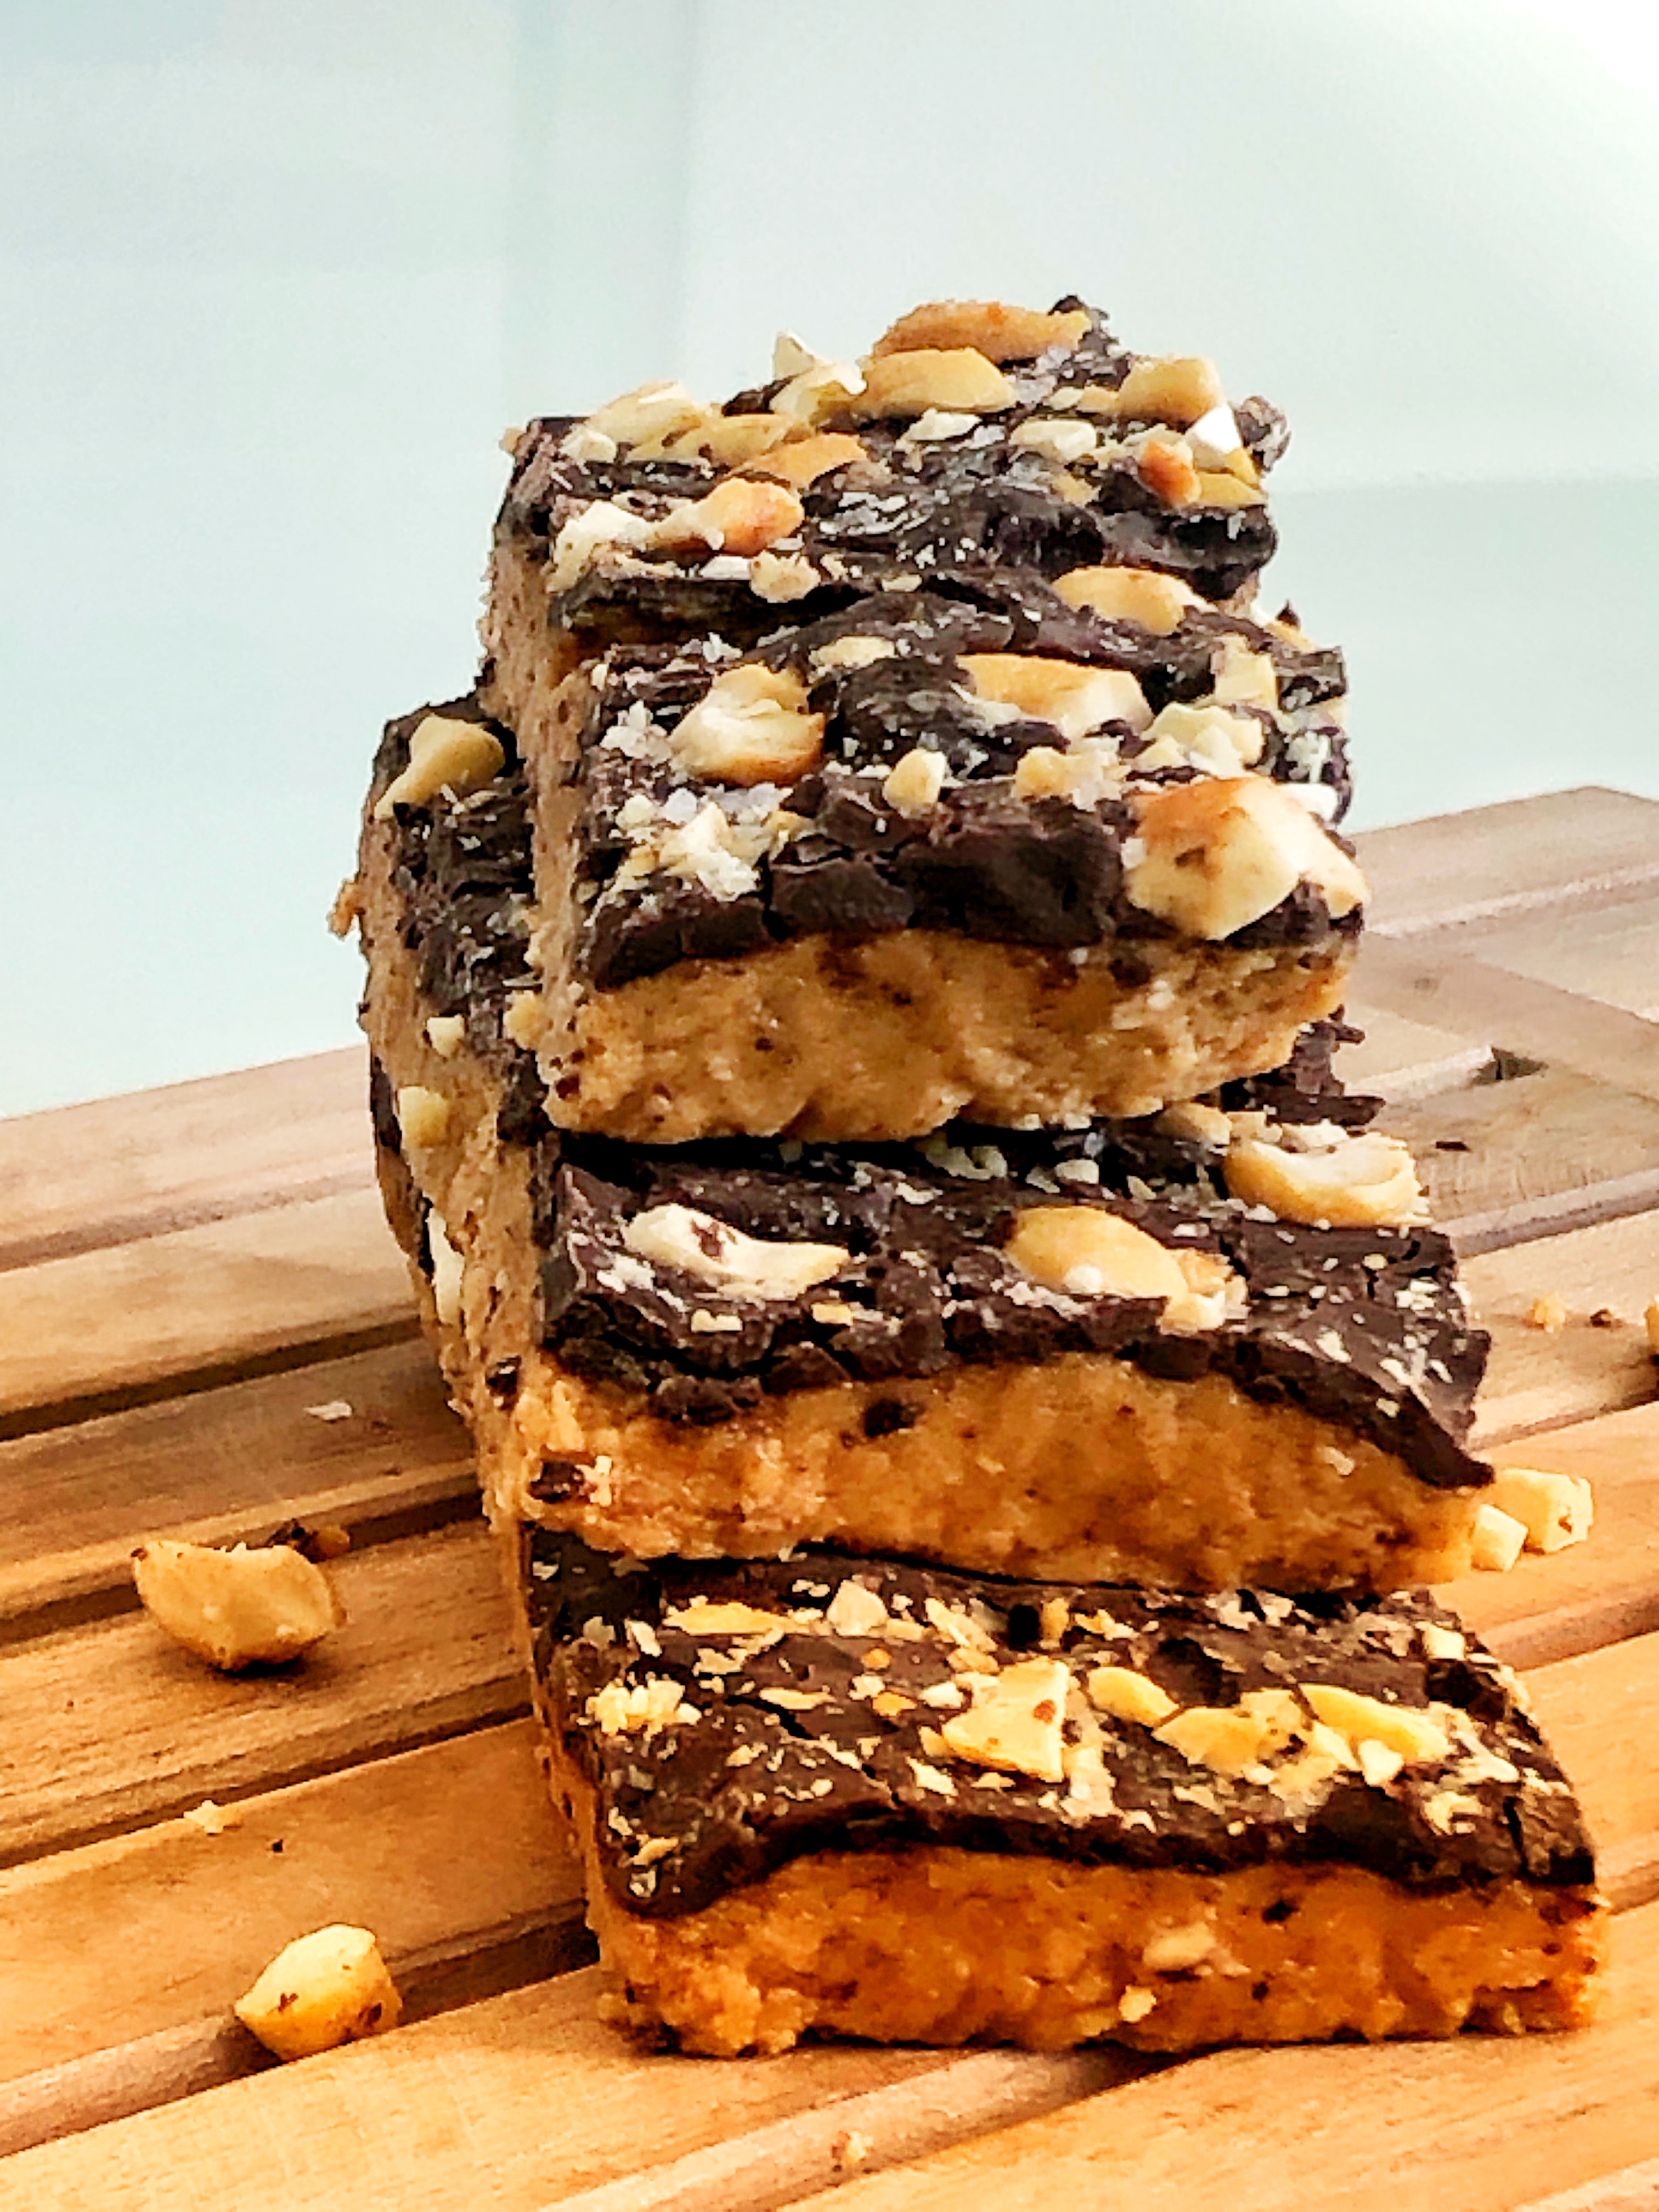 Homemade Collagen Protein Bars that actually taste like Reese’s Bars (Dairy free, Gluten free, Keto friendly, No refined sugar)